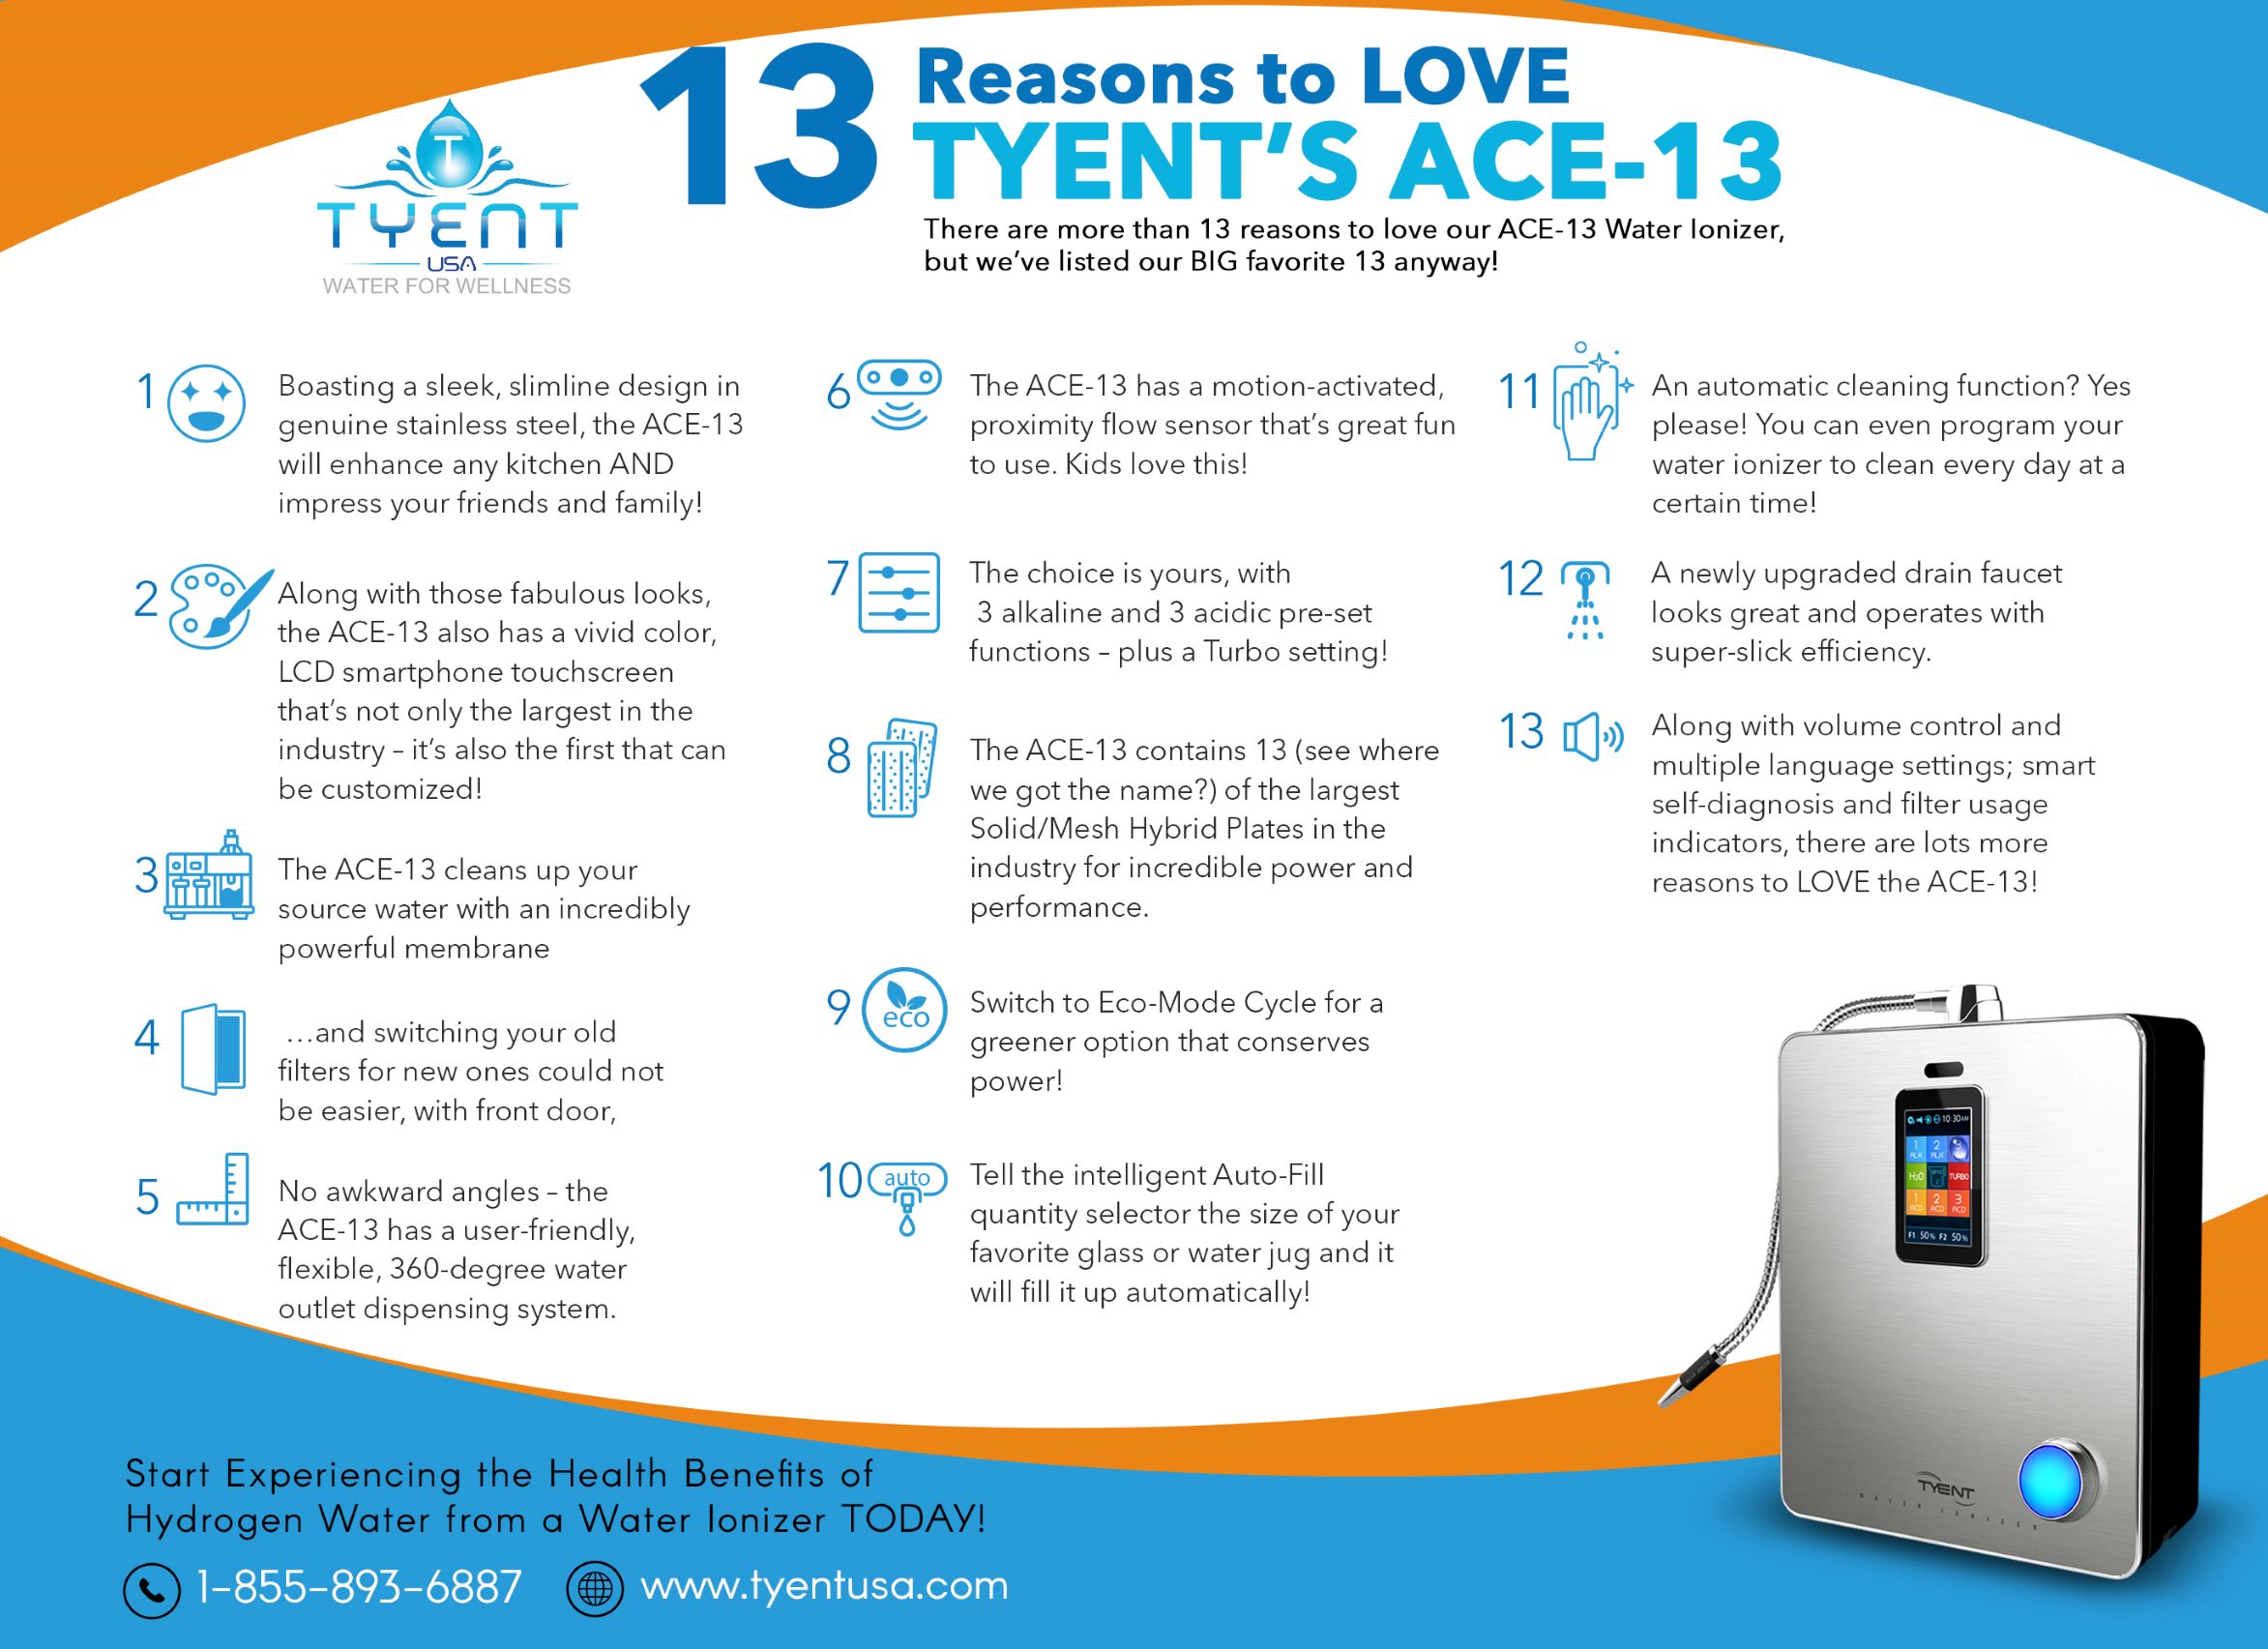 13 Reasons to Love Tyent's ACE-13 Infographic